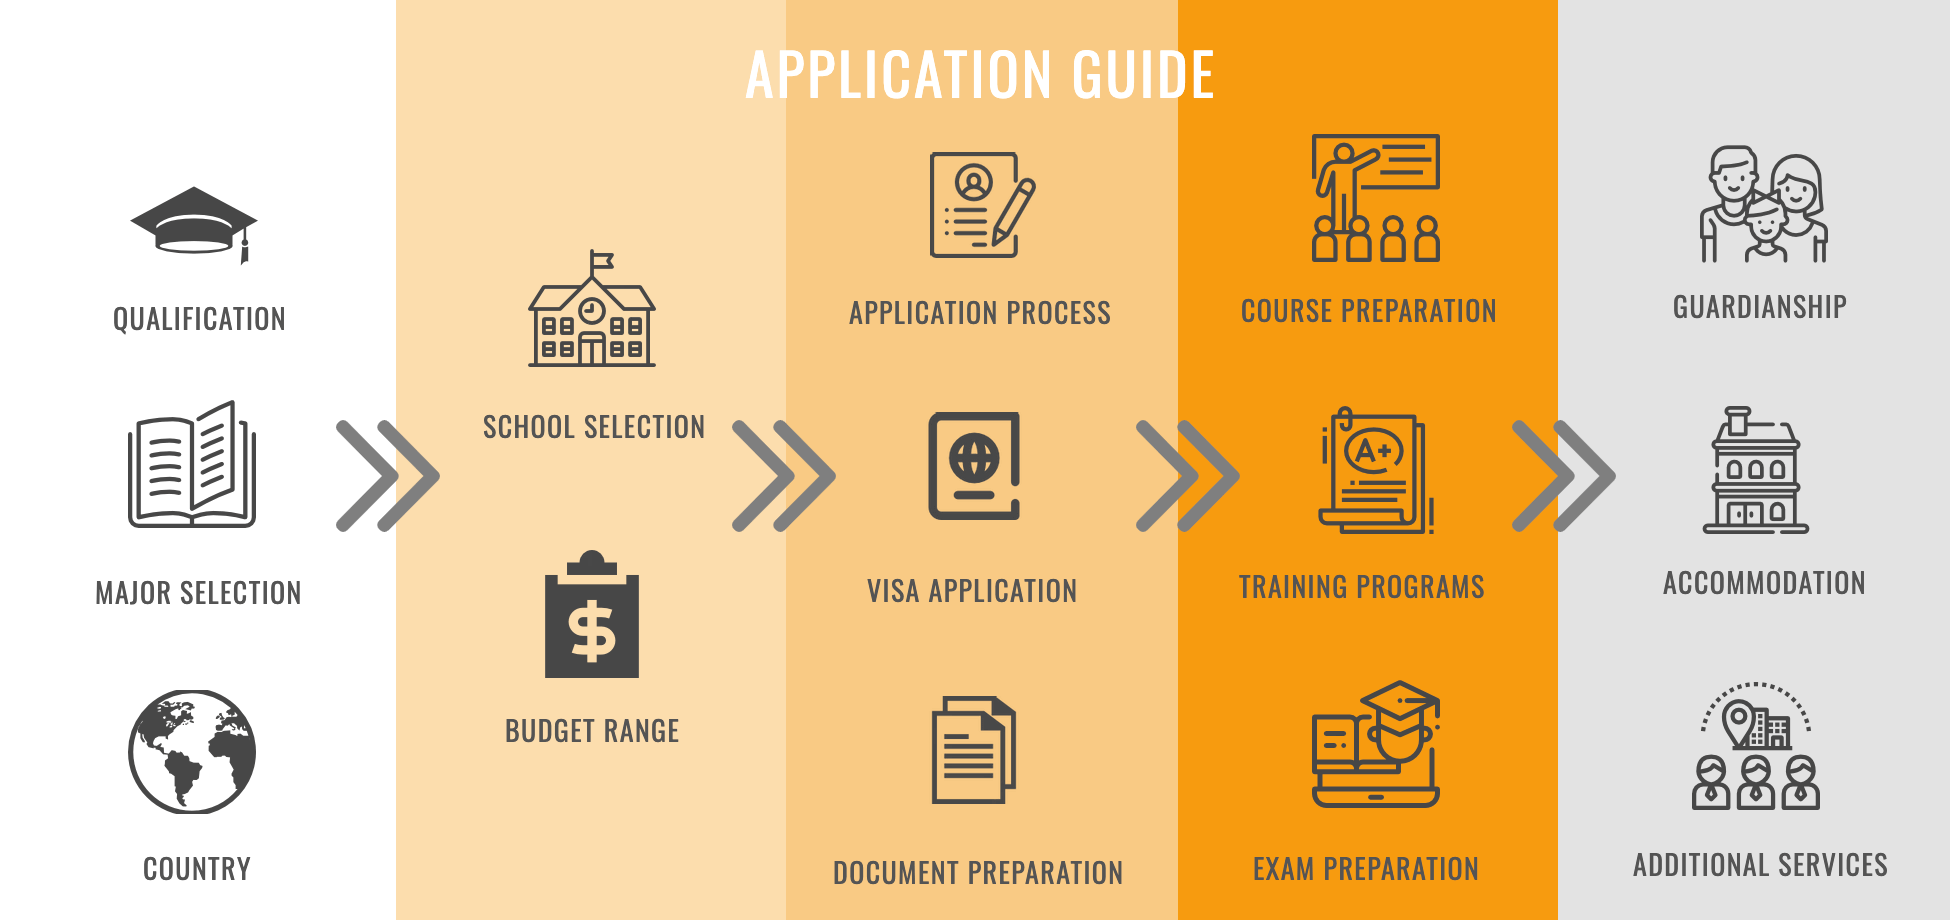 Application guide 6